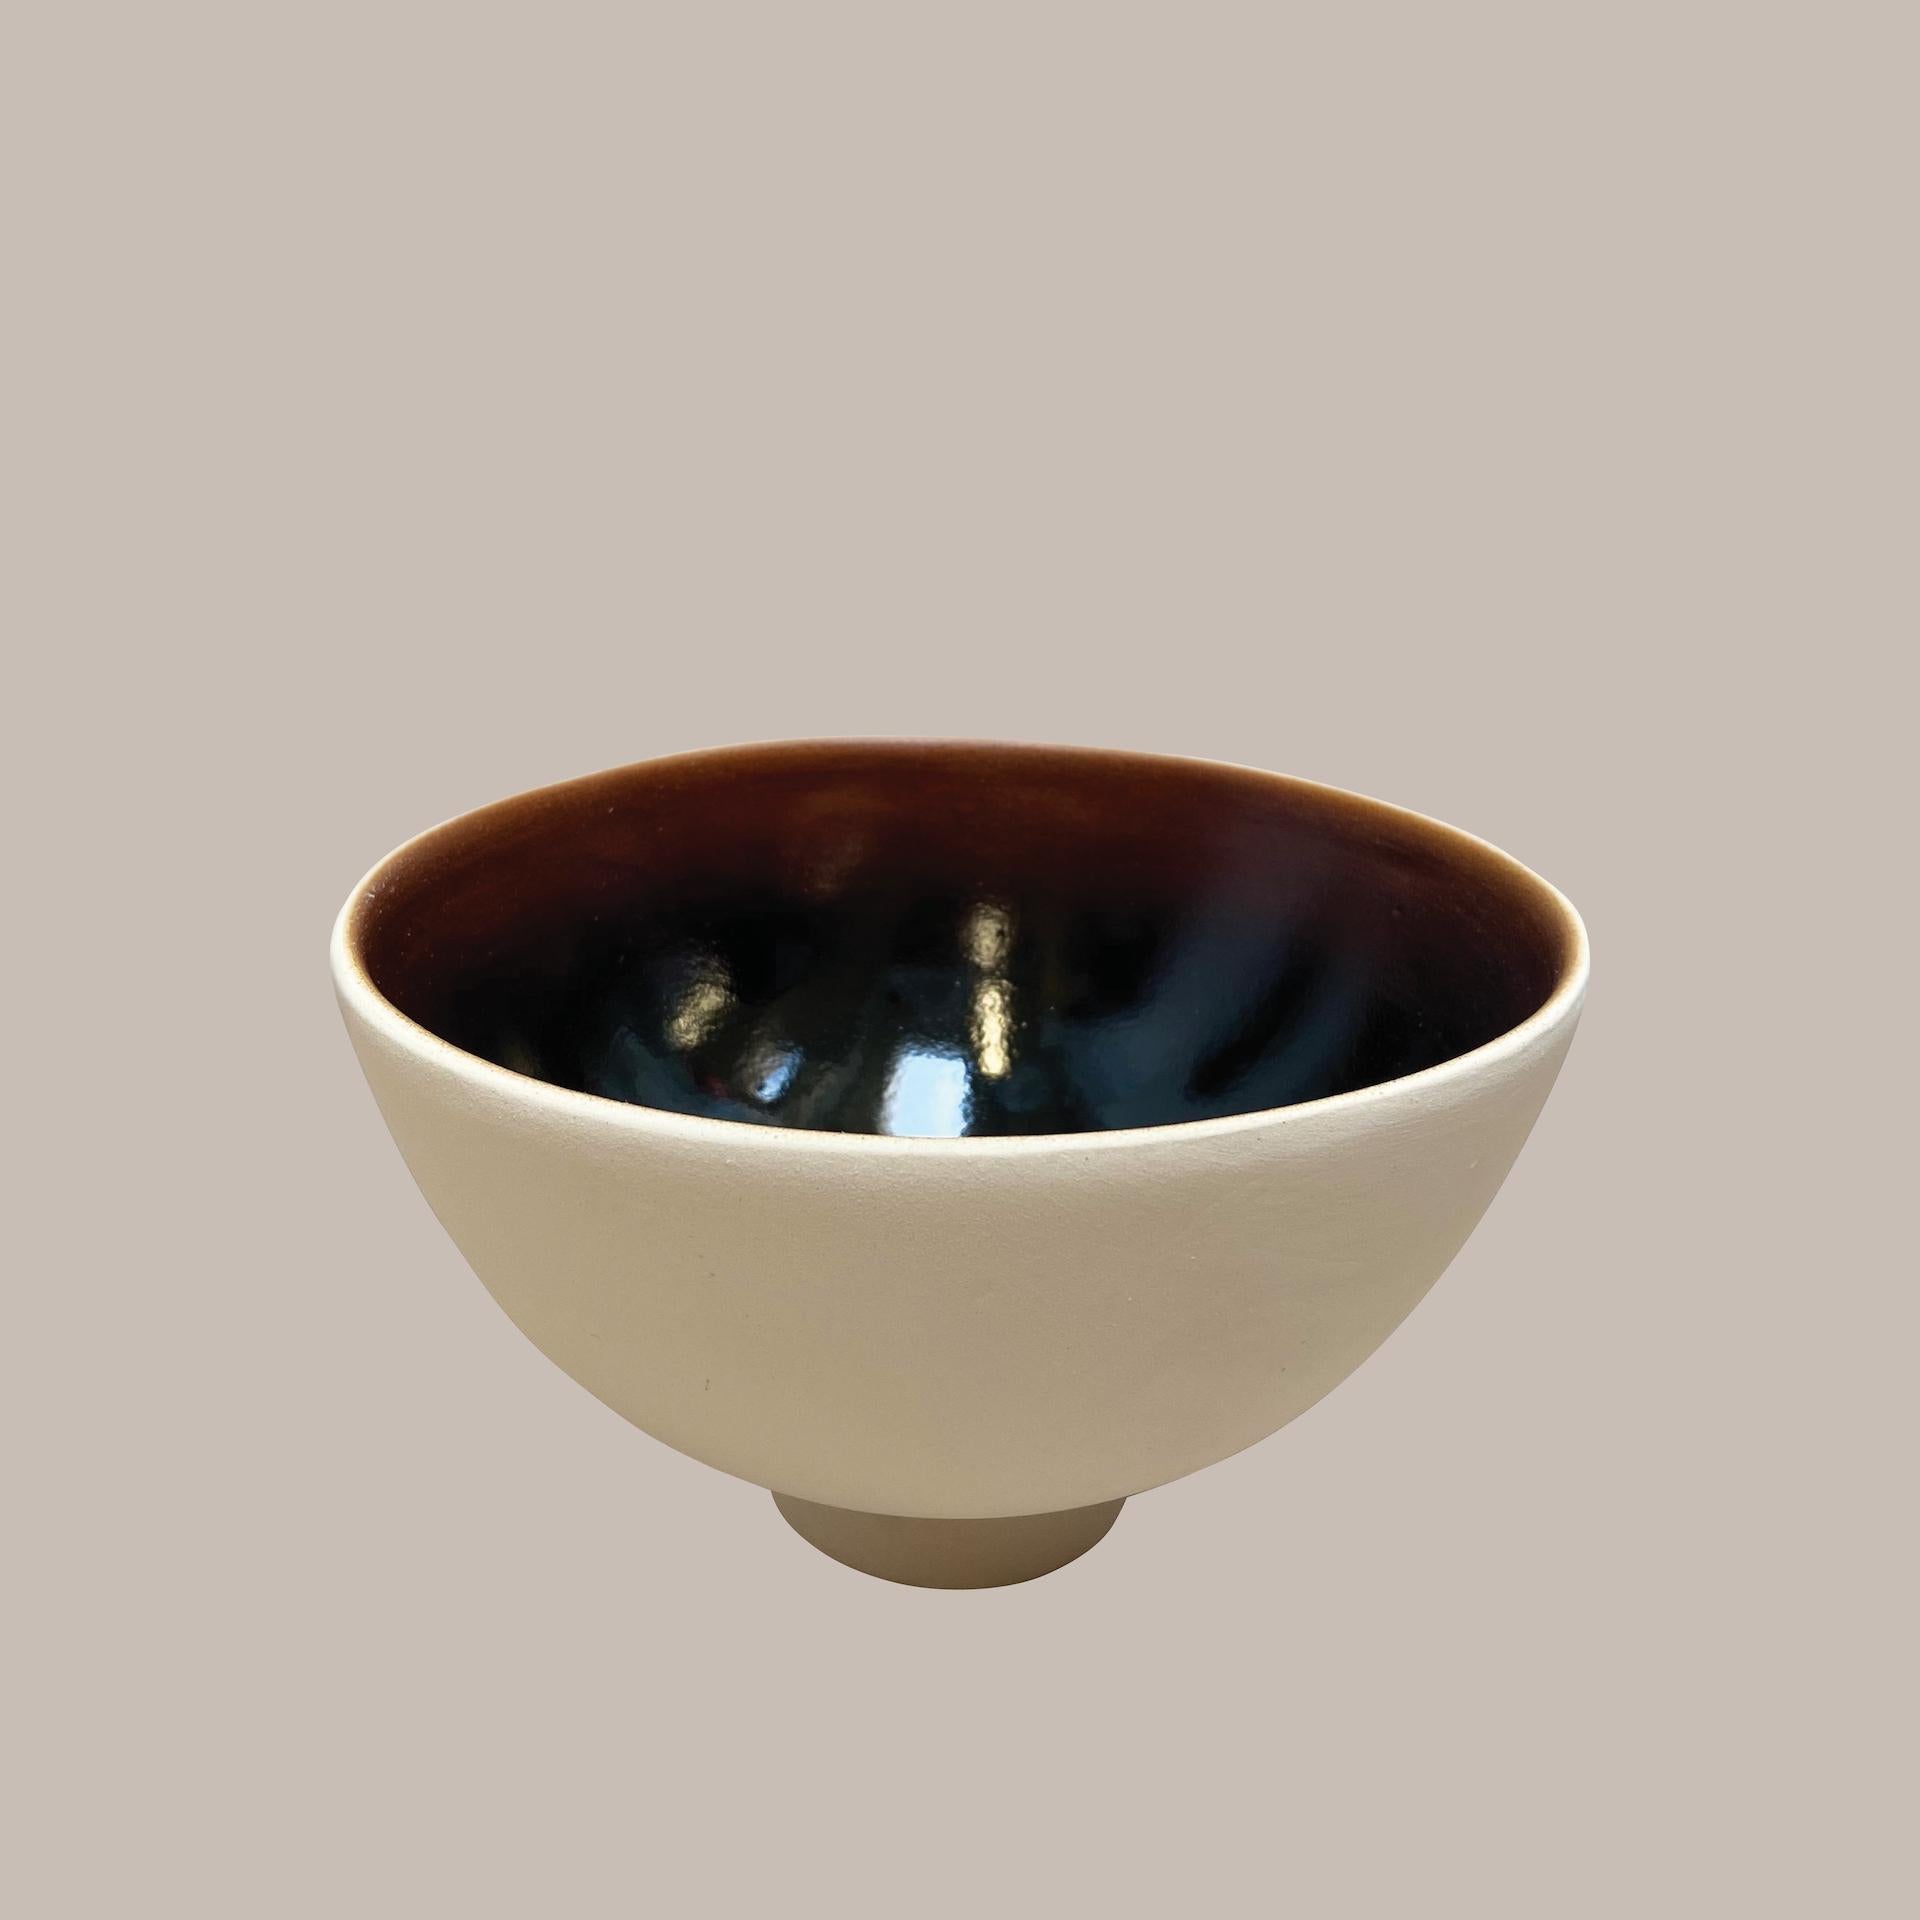 Dutch Ott Another Paradigmatic Handmade Ceramic Cup by Studio Yoon Seok-Hyeon For Sale